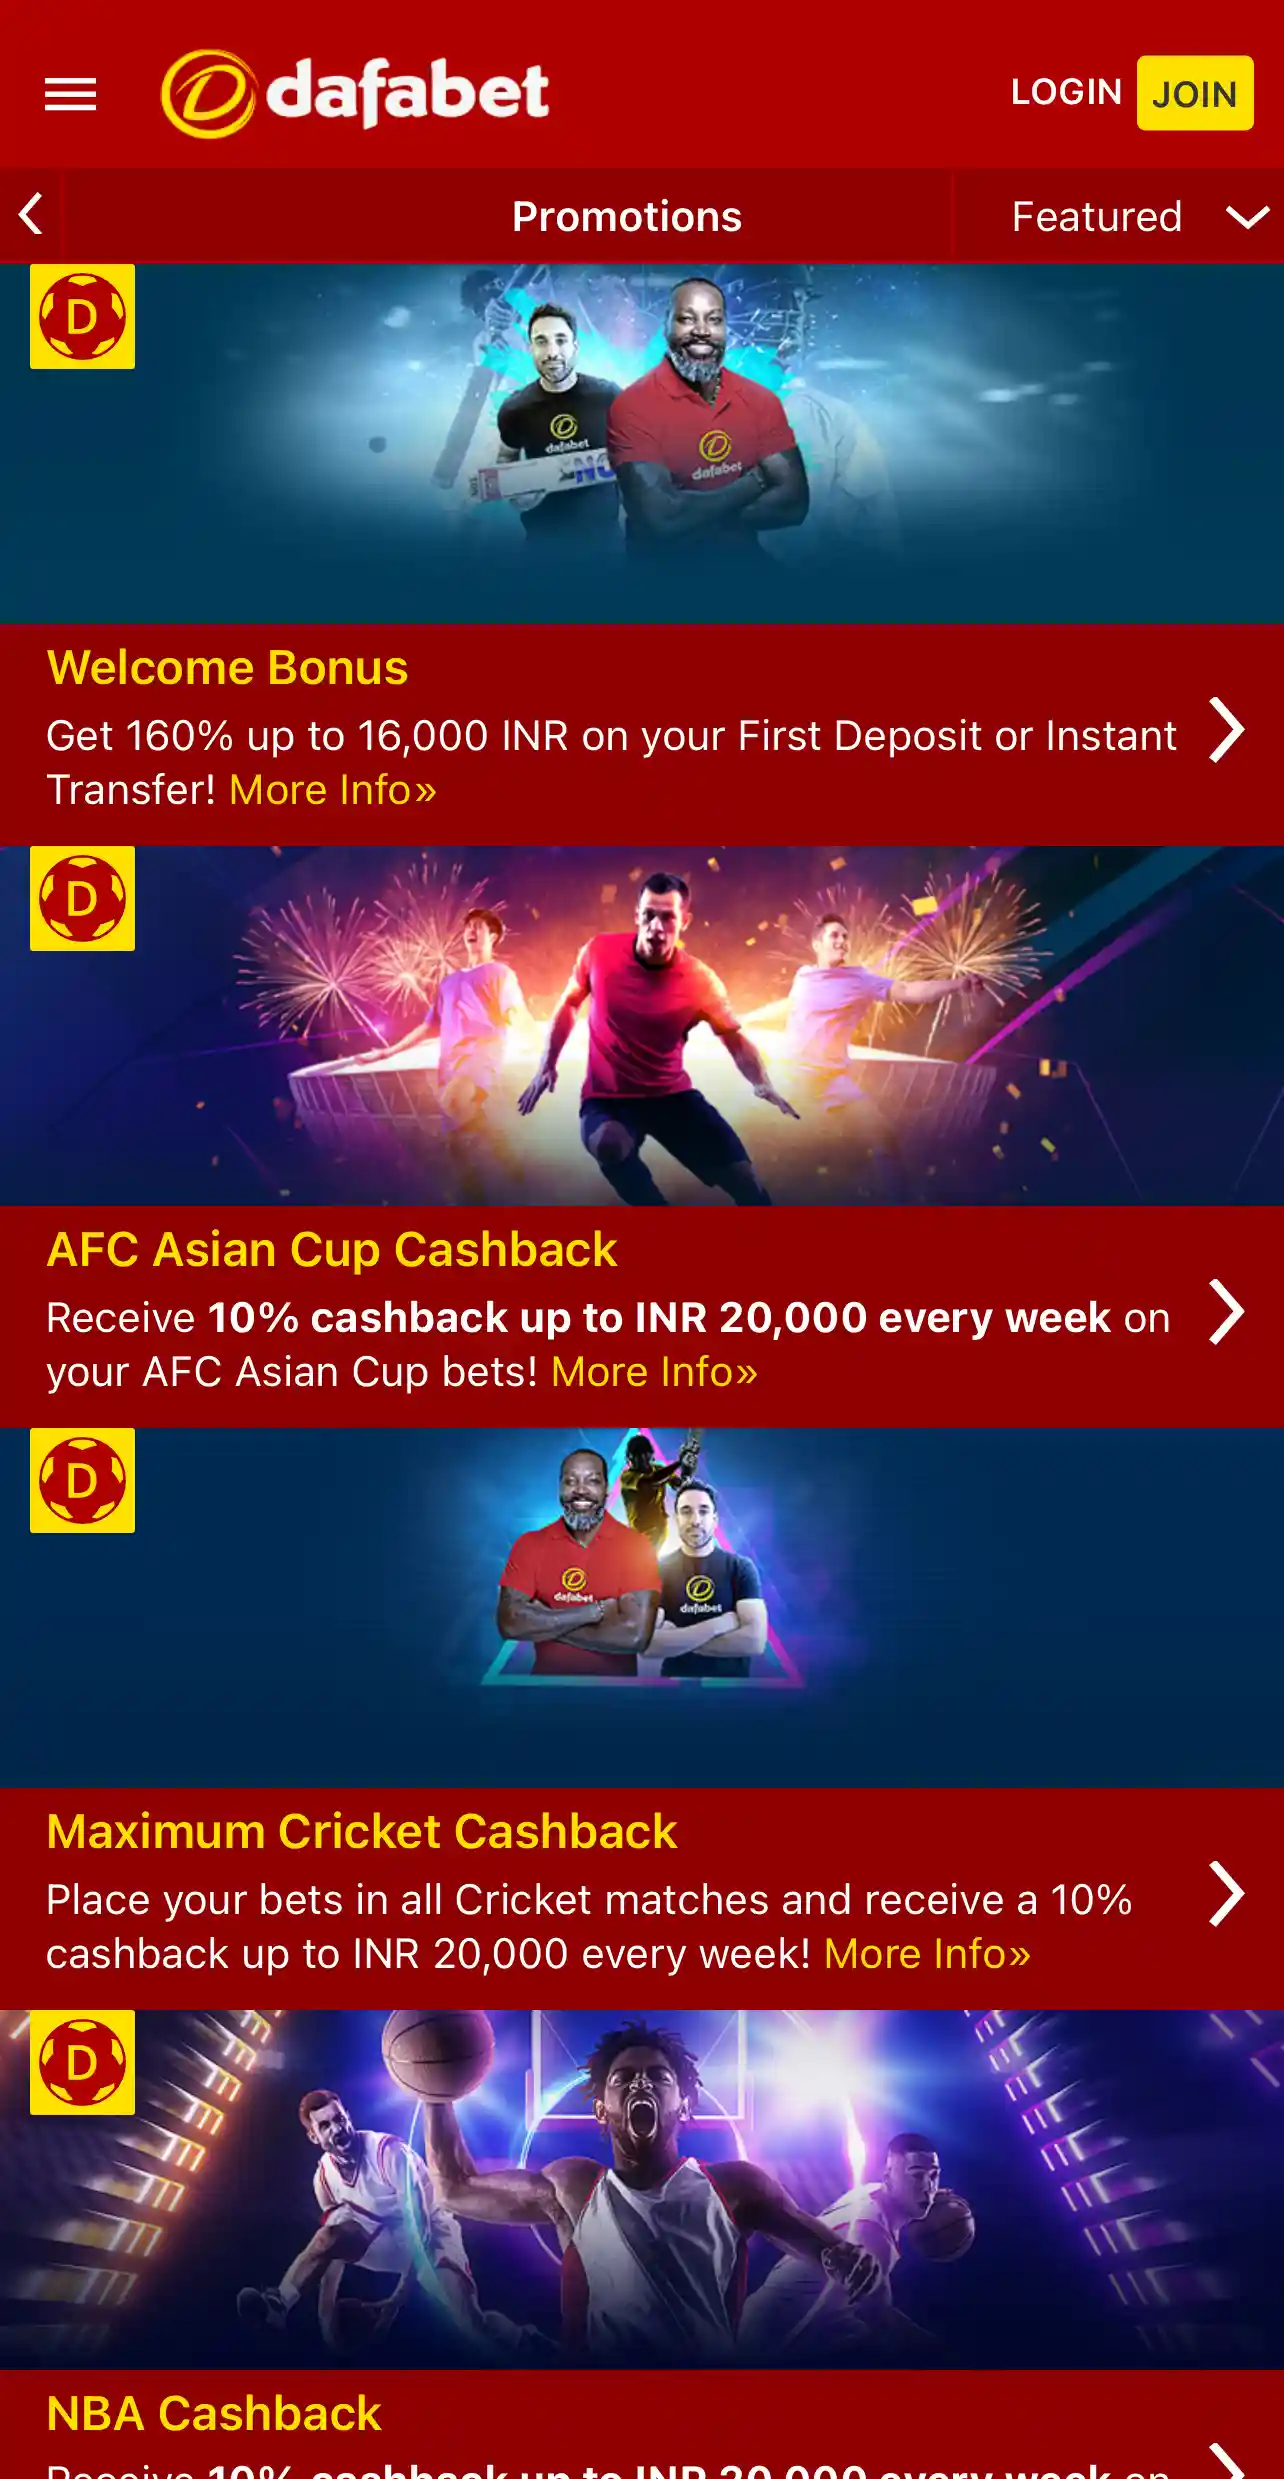 Welcome bonuses are waiting every player who registers on the Dafabet app.